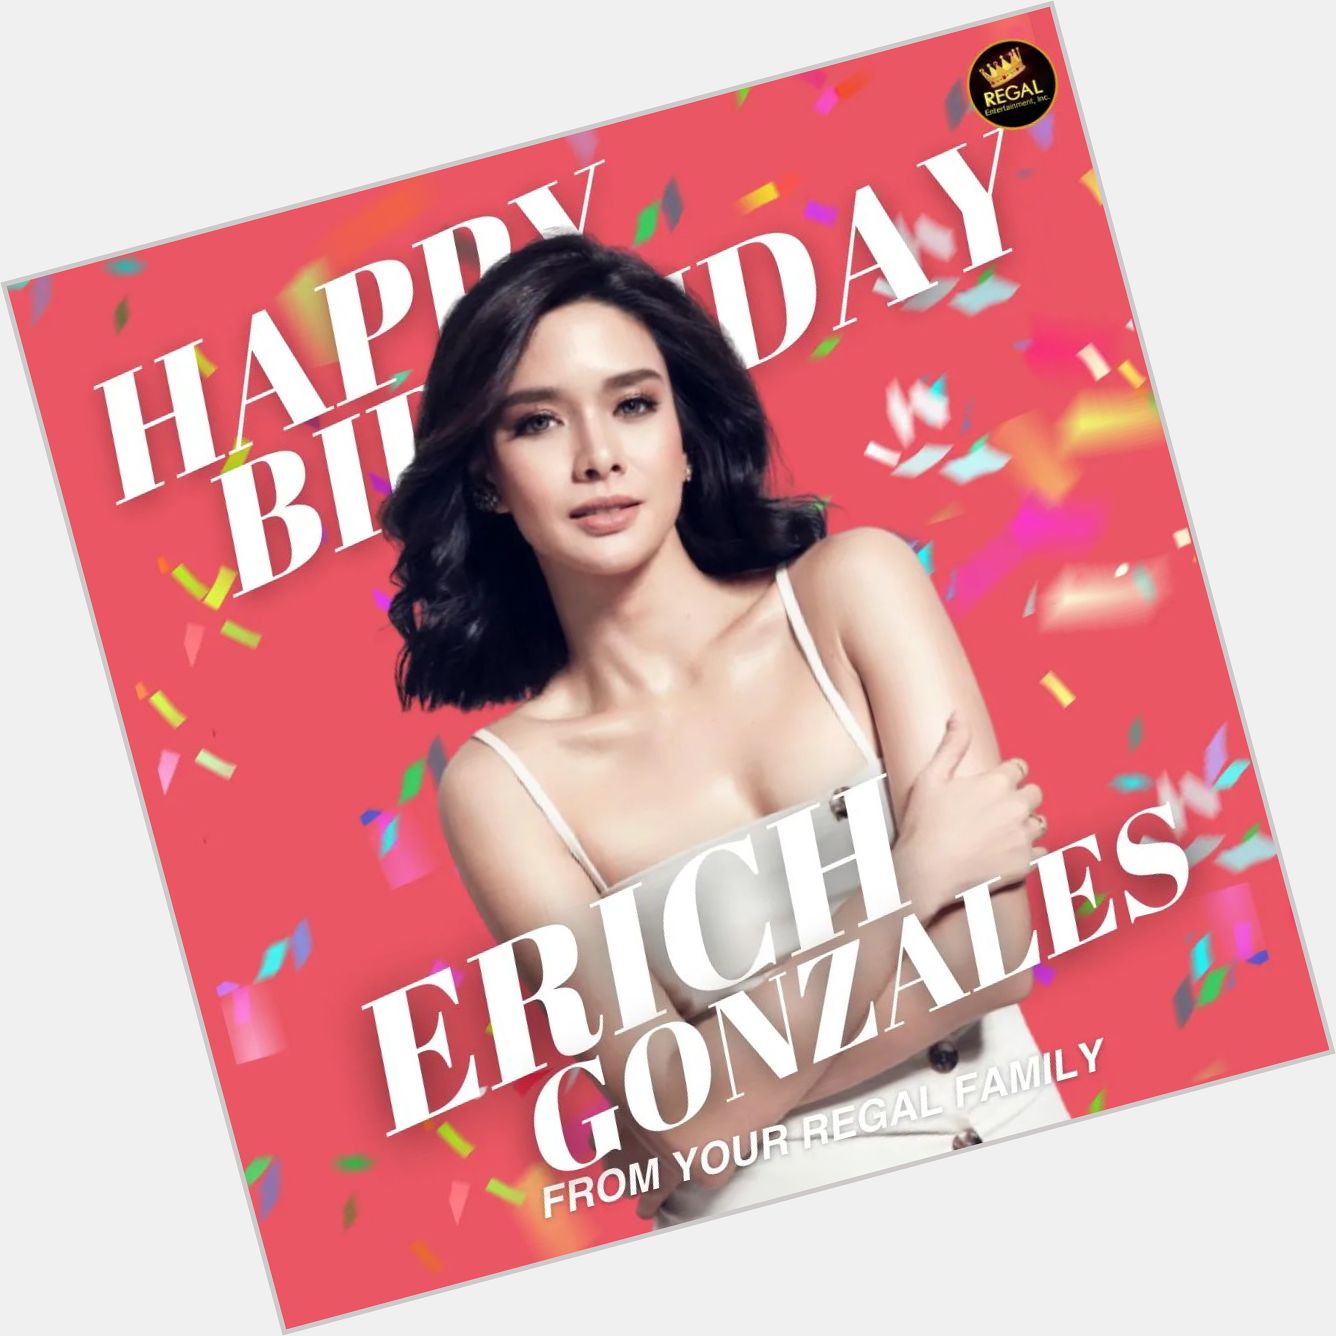 Happy Birthday, Erich Gonzales! We wish you all the best in life! From your Regal Family!  